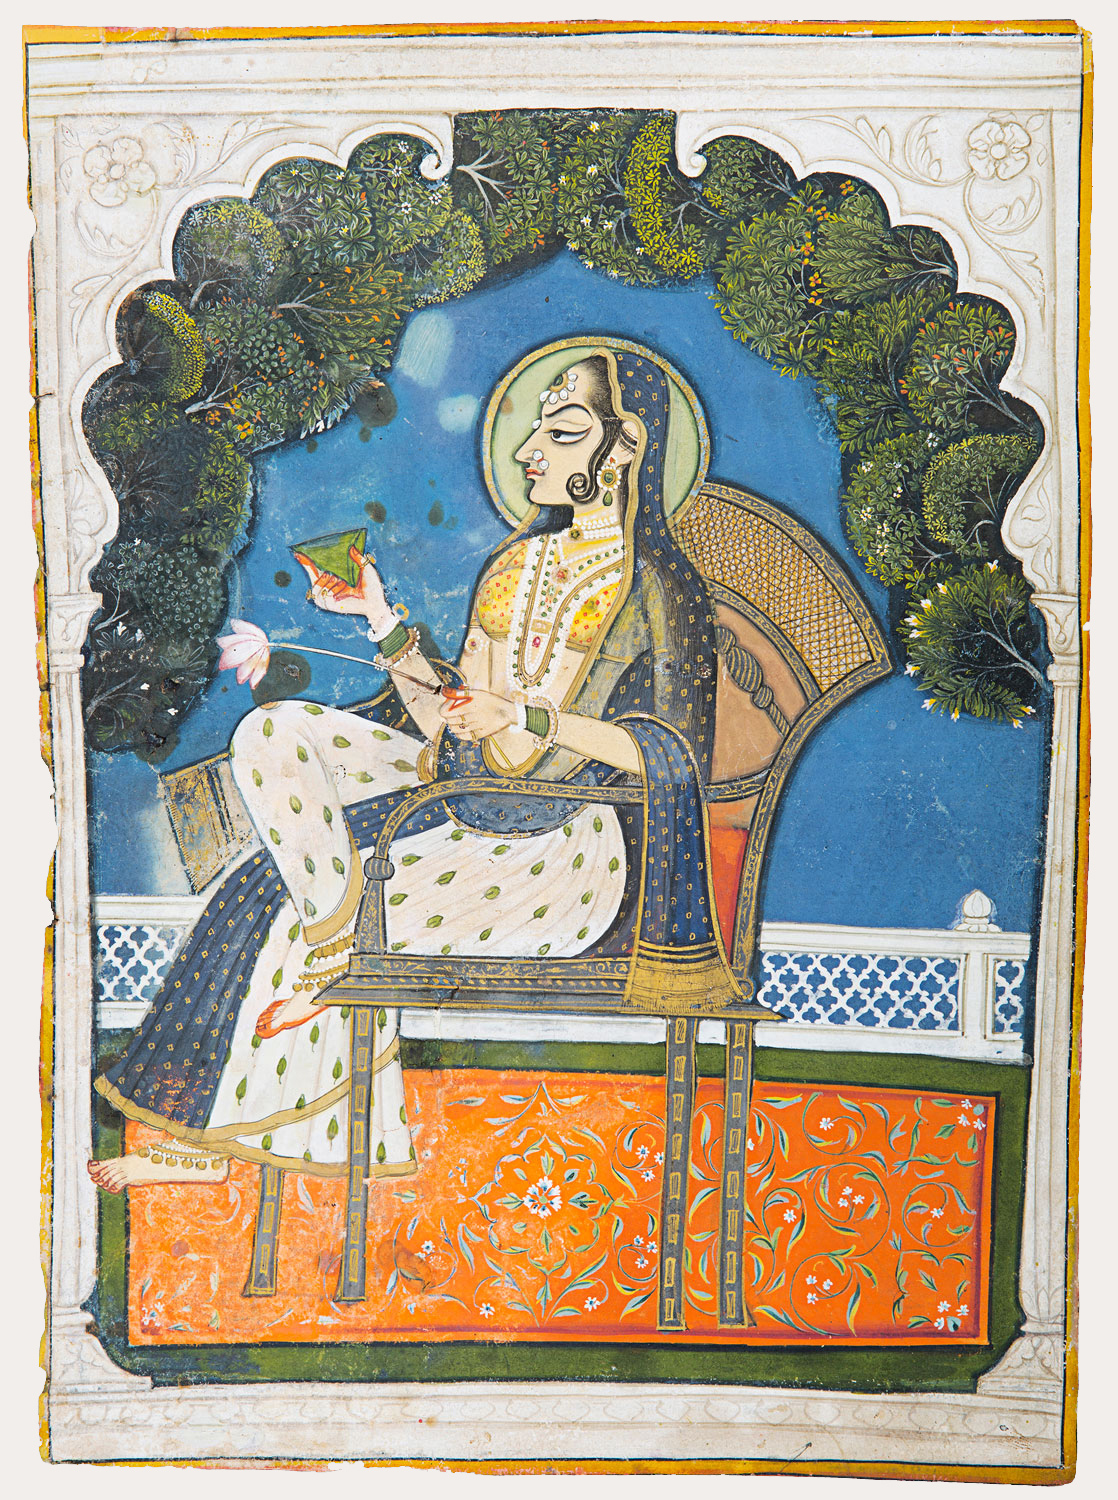 An outline of a window inside which a woman looks sideways and holds a betel leaf in one hand and a lotus stem in the other. She folds her leg over the other. Her background is an evening sky and trees. She is seated on a high chair on an orange carpet with floral design. (how do we say, we can see her from a window)